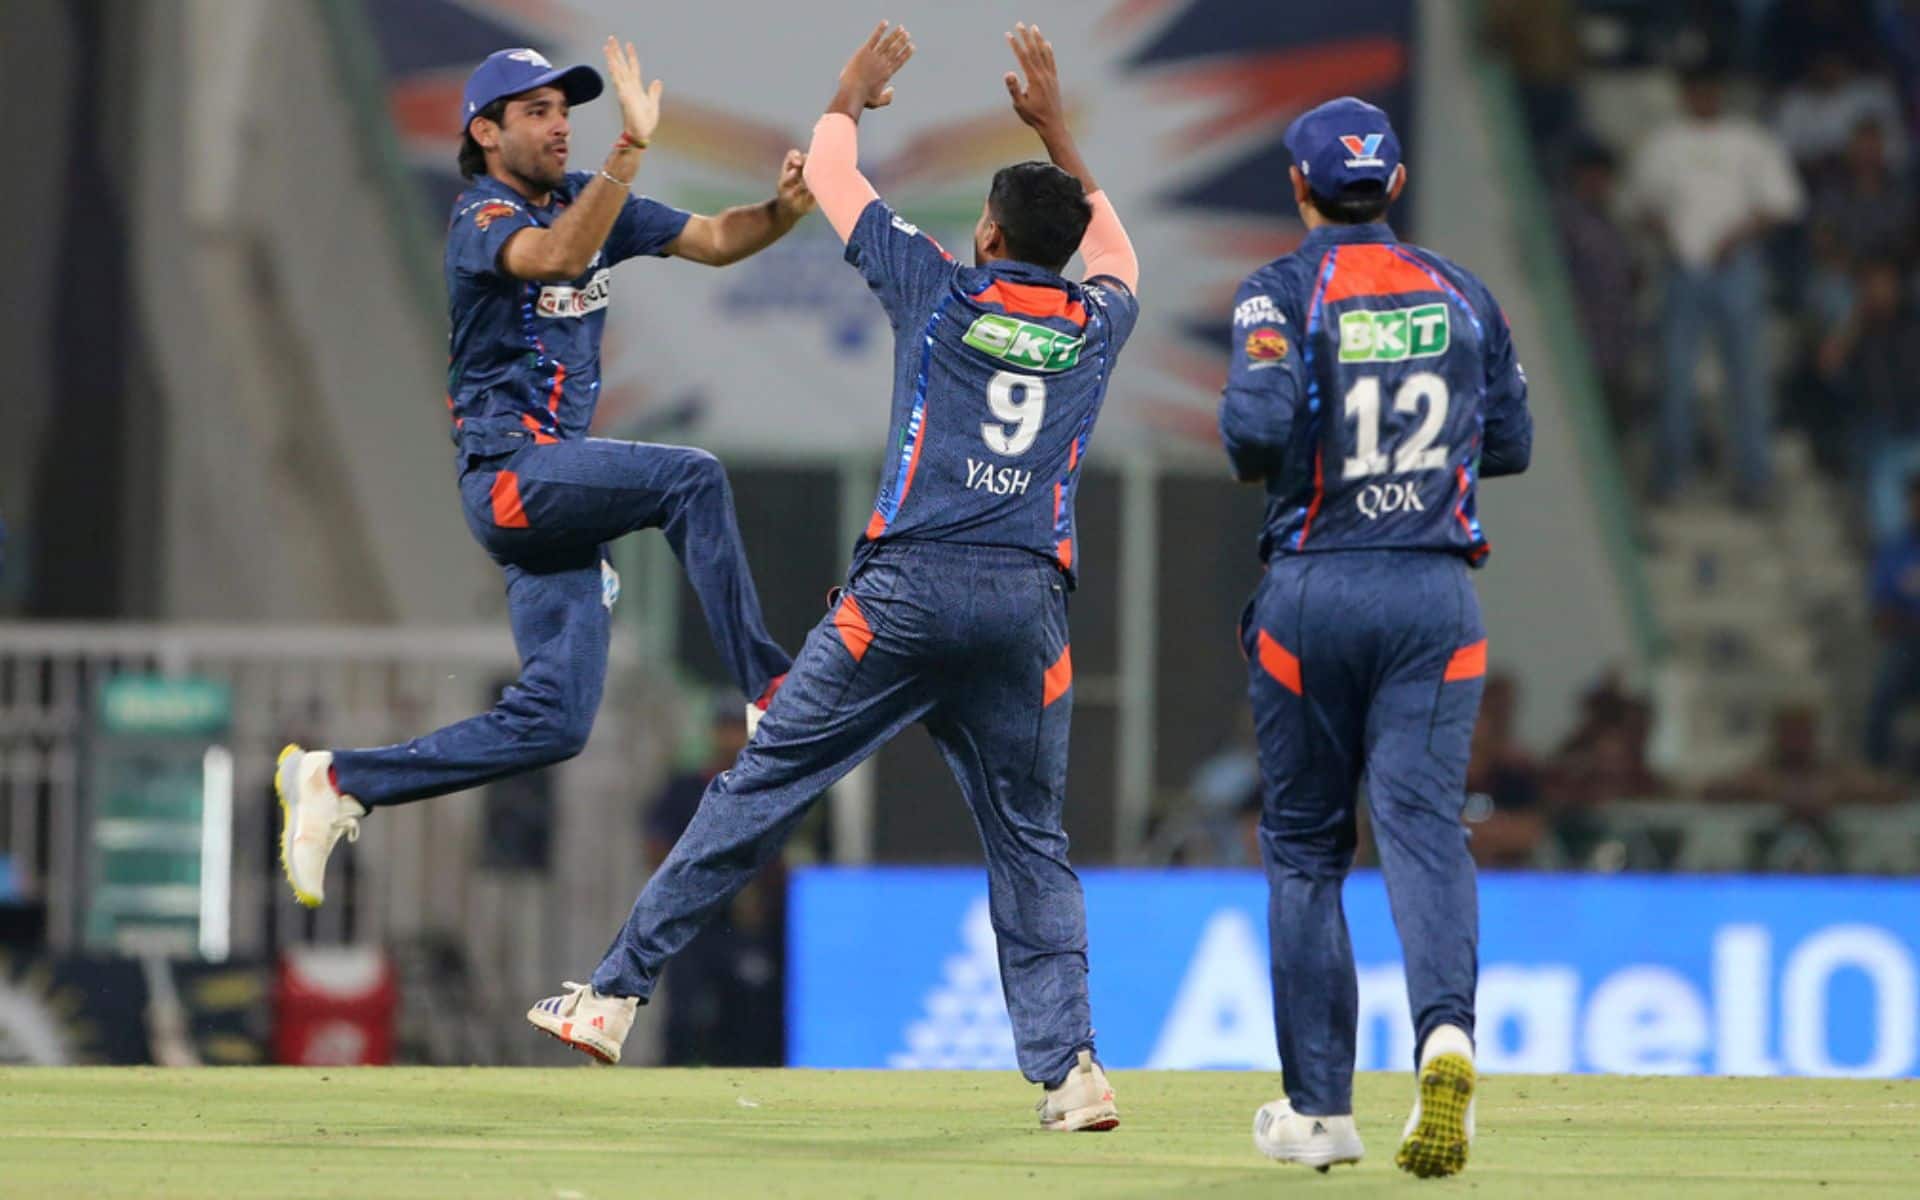 'Shubman Gill's Wicket Was The Most Special' - Yash Thakur After Superb Five-Wiicket Haul Vs GT